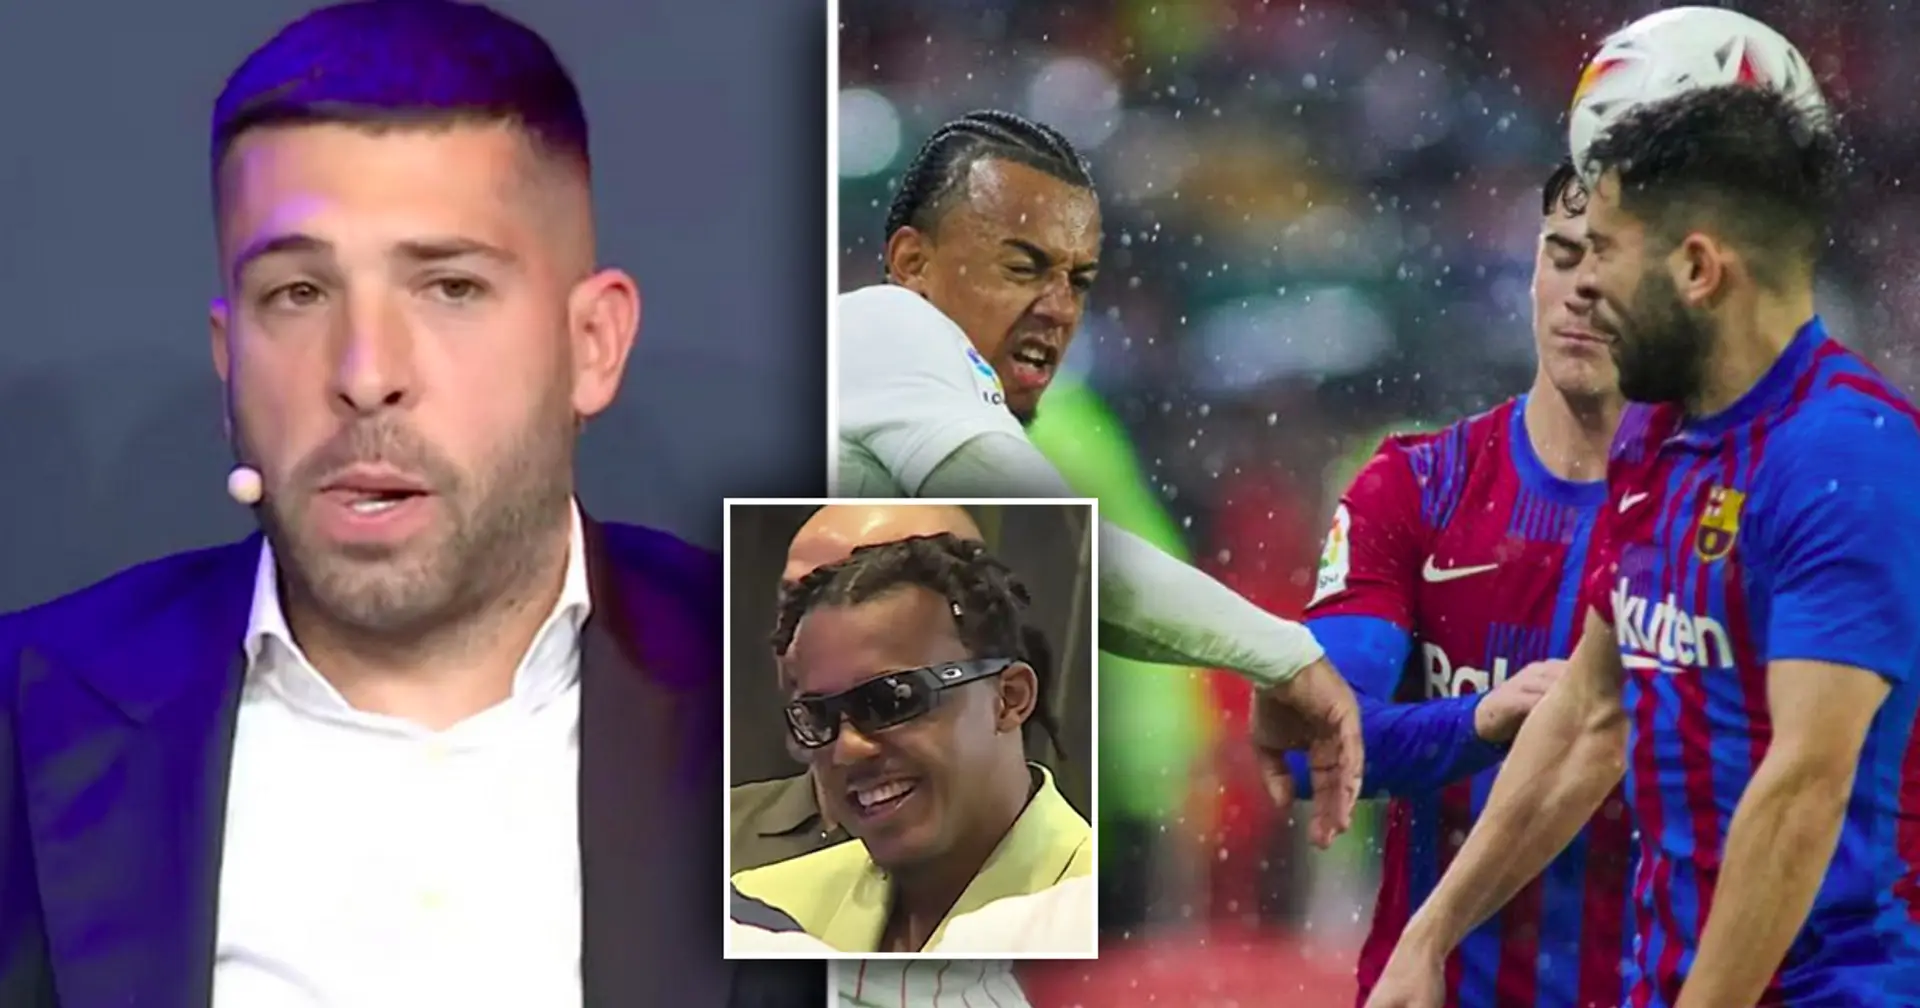 Alba reveals what he thinks about Kounde hitting him with ball – they showed the vid during farewell ceremony